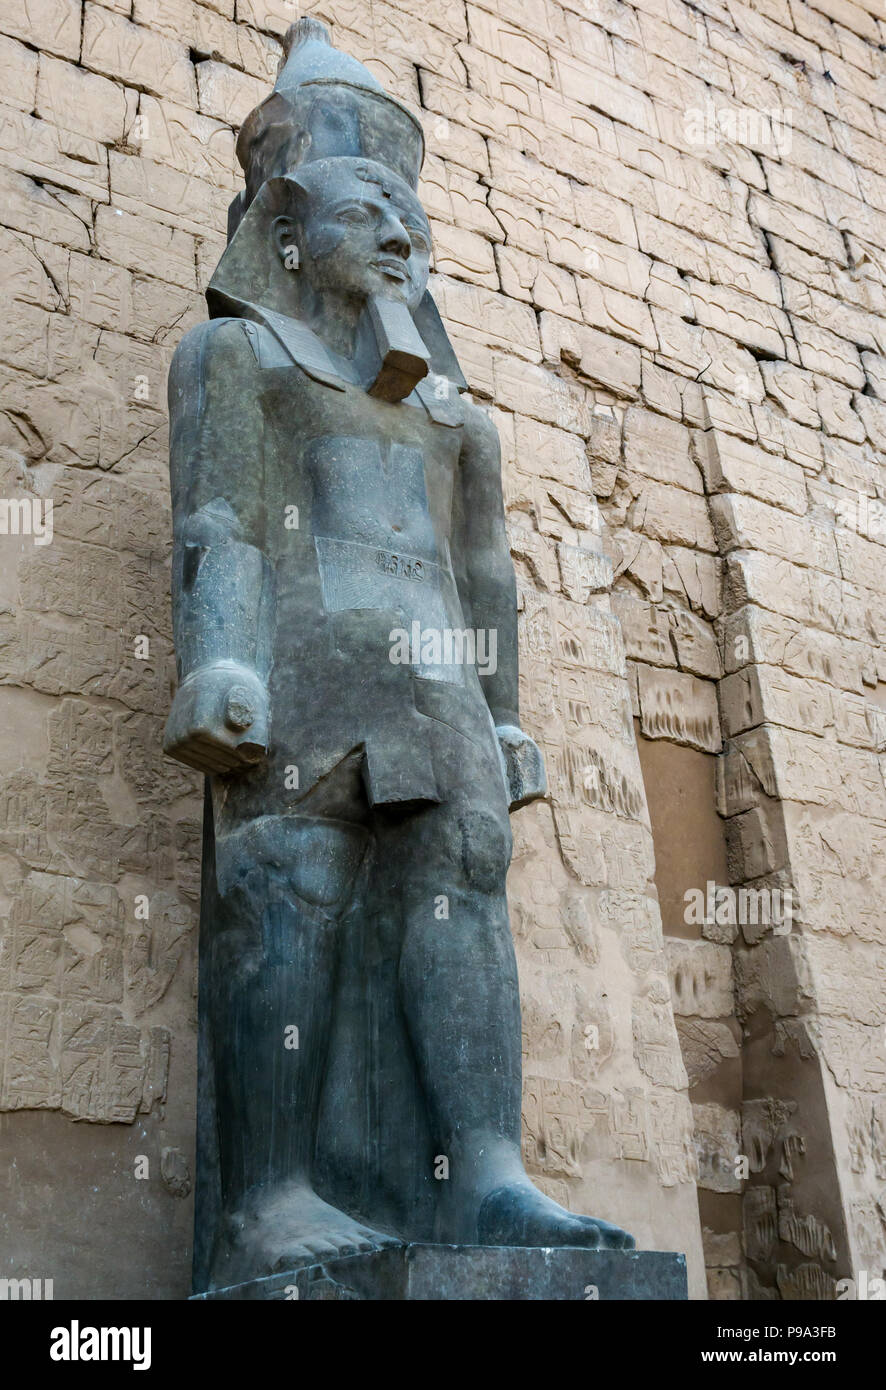 Colossi figure of Ramses II at entrance outer pylon, Luxor Temple, Luxor, Egypt, Africa Stock Photo